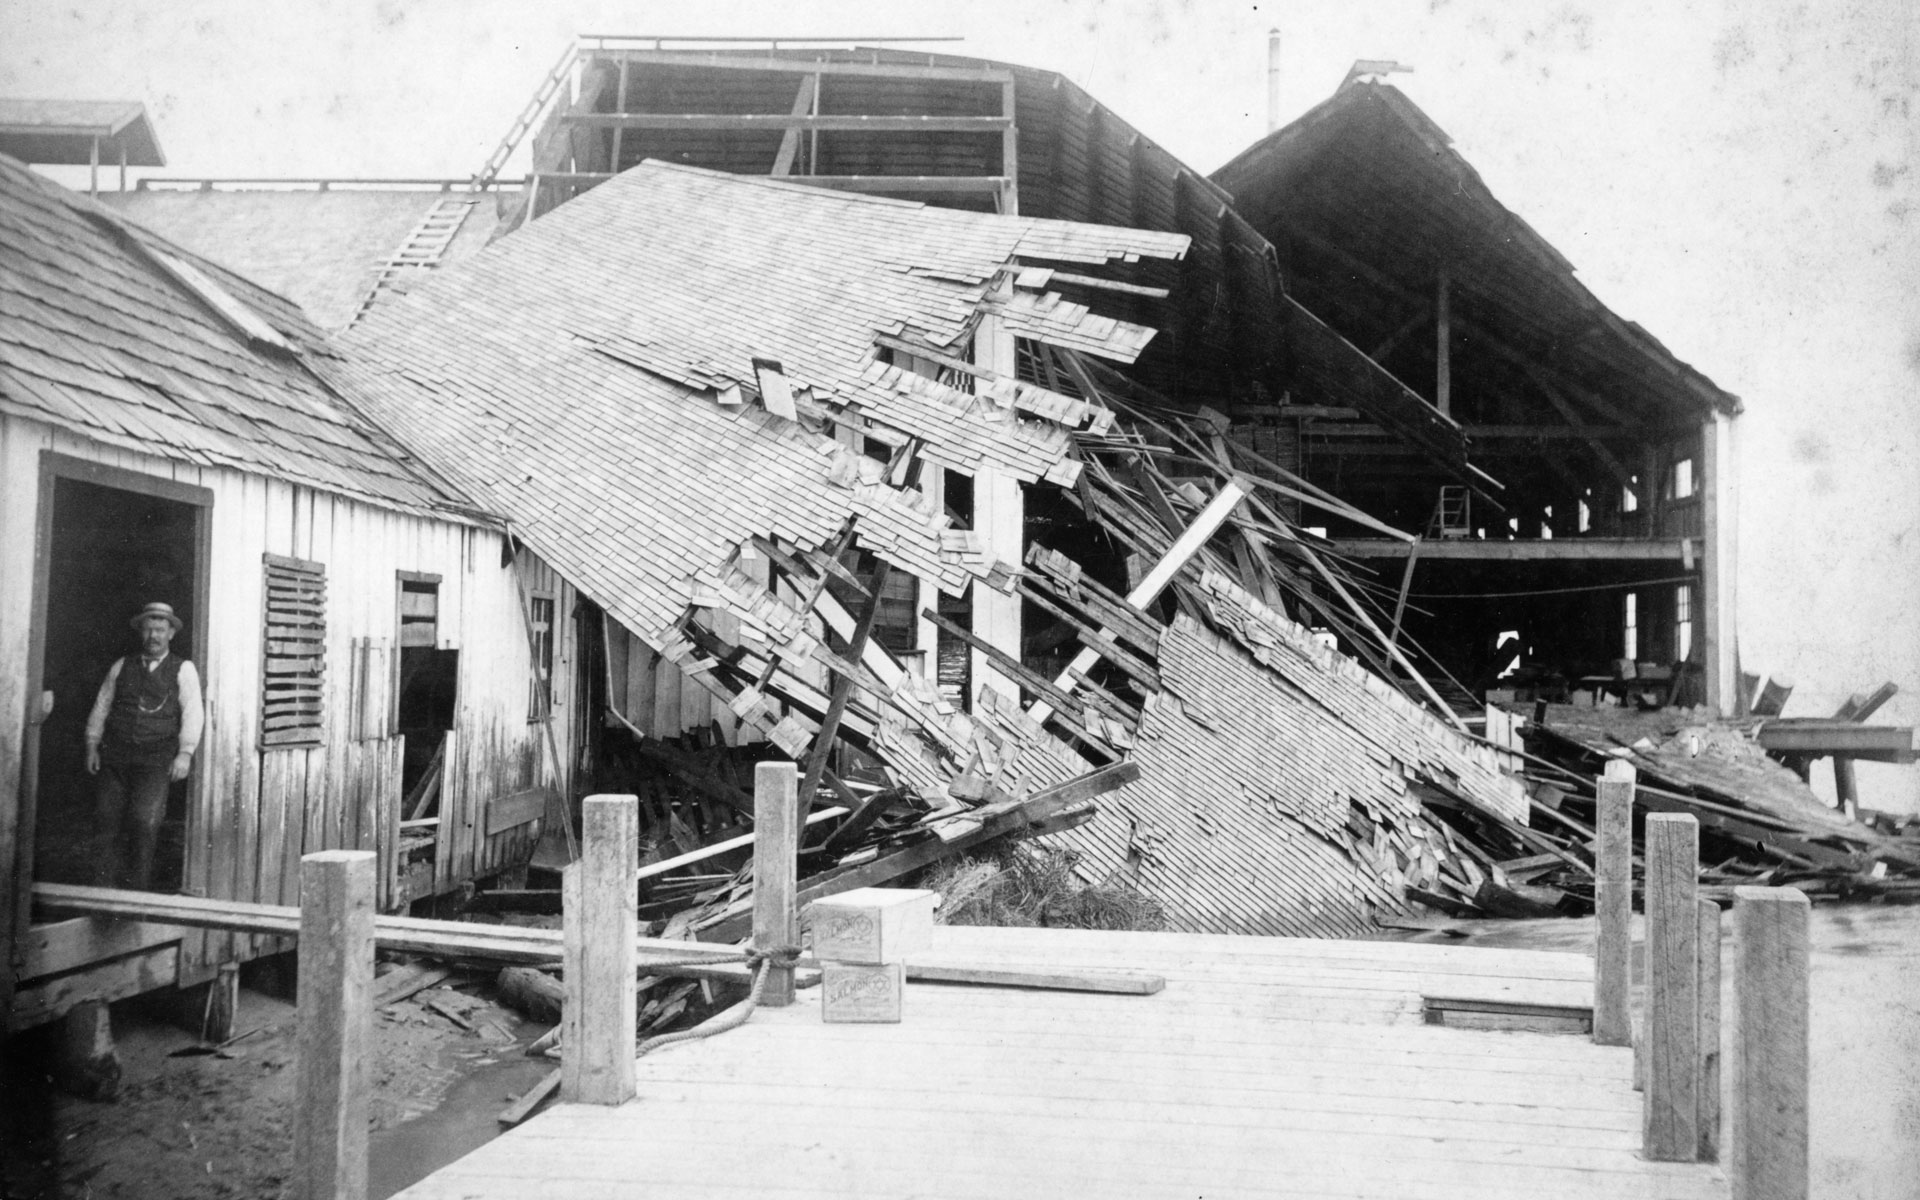 Cannery building with collapsed roof.